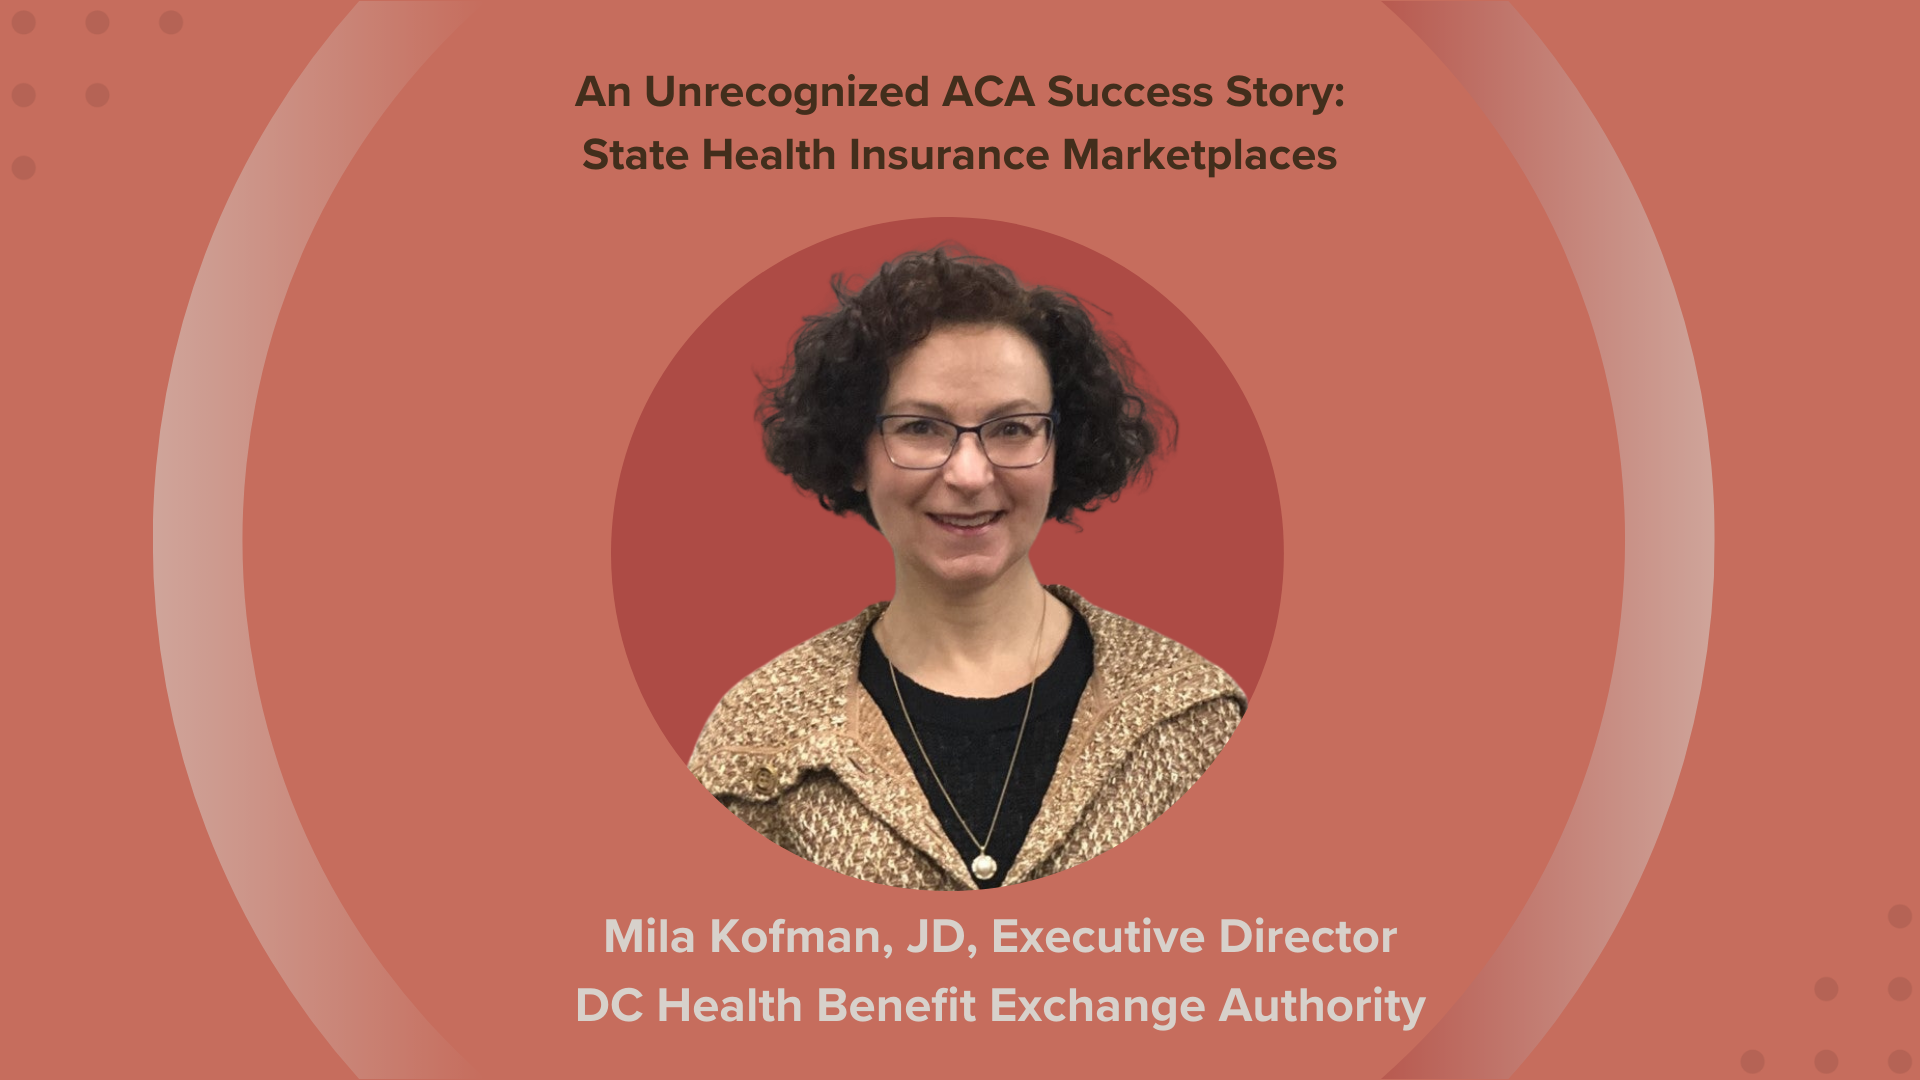 An Unrecognized ACA Success Story: State Health Insurance Marketplaces